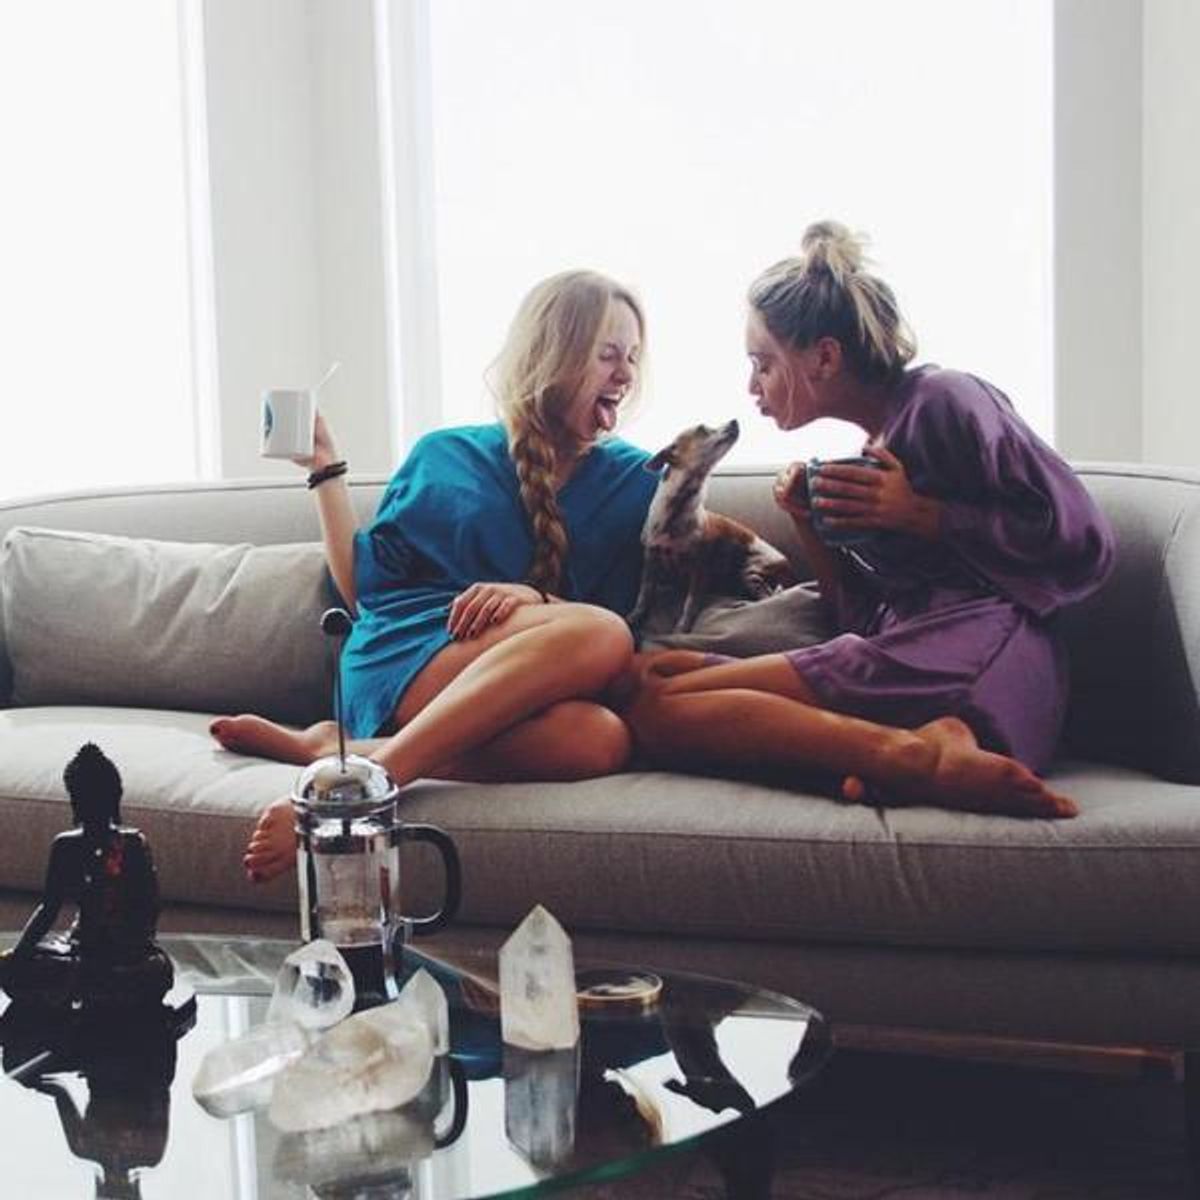 20 Signs Your Roommate Is Your Best Friend